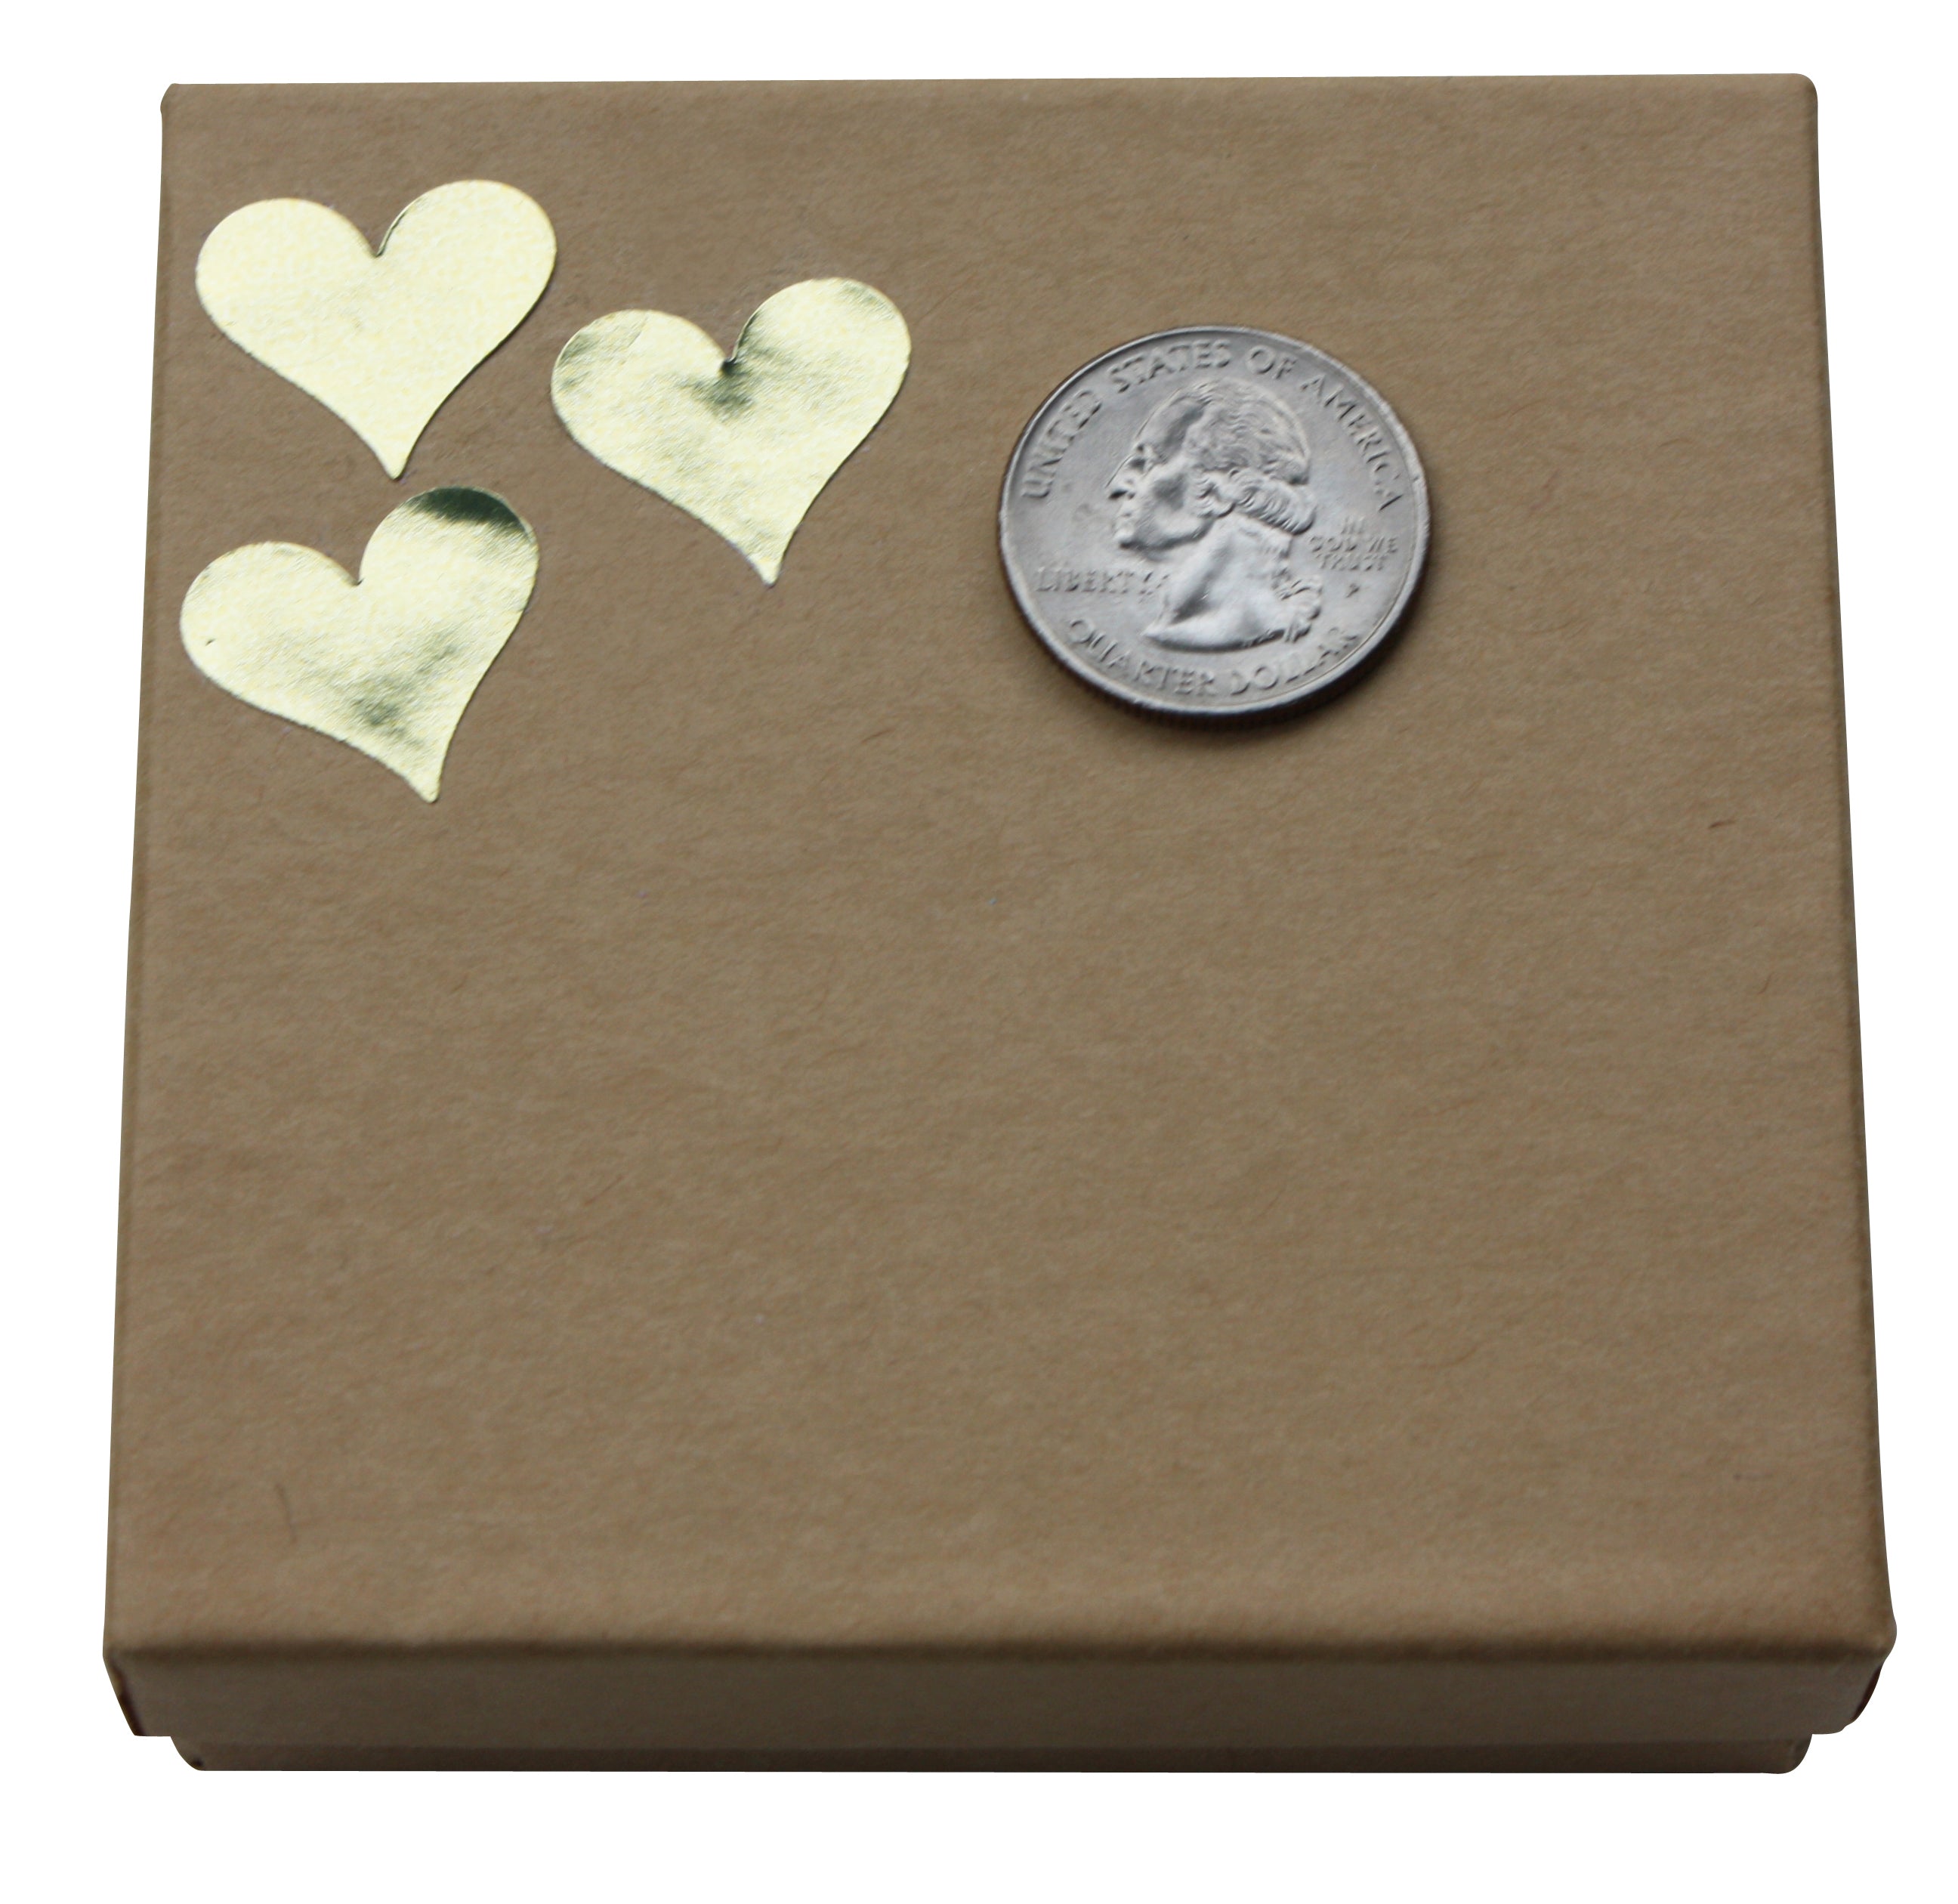 Heart Stickers Labels 3/4 inch 19mm – Royal Green Market